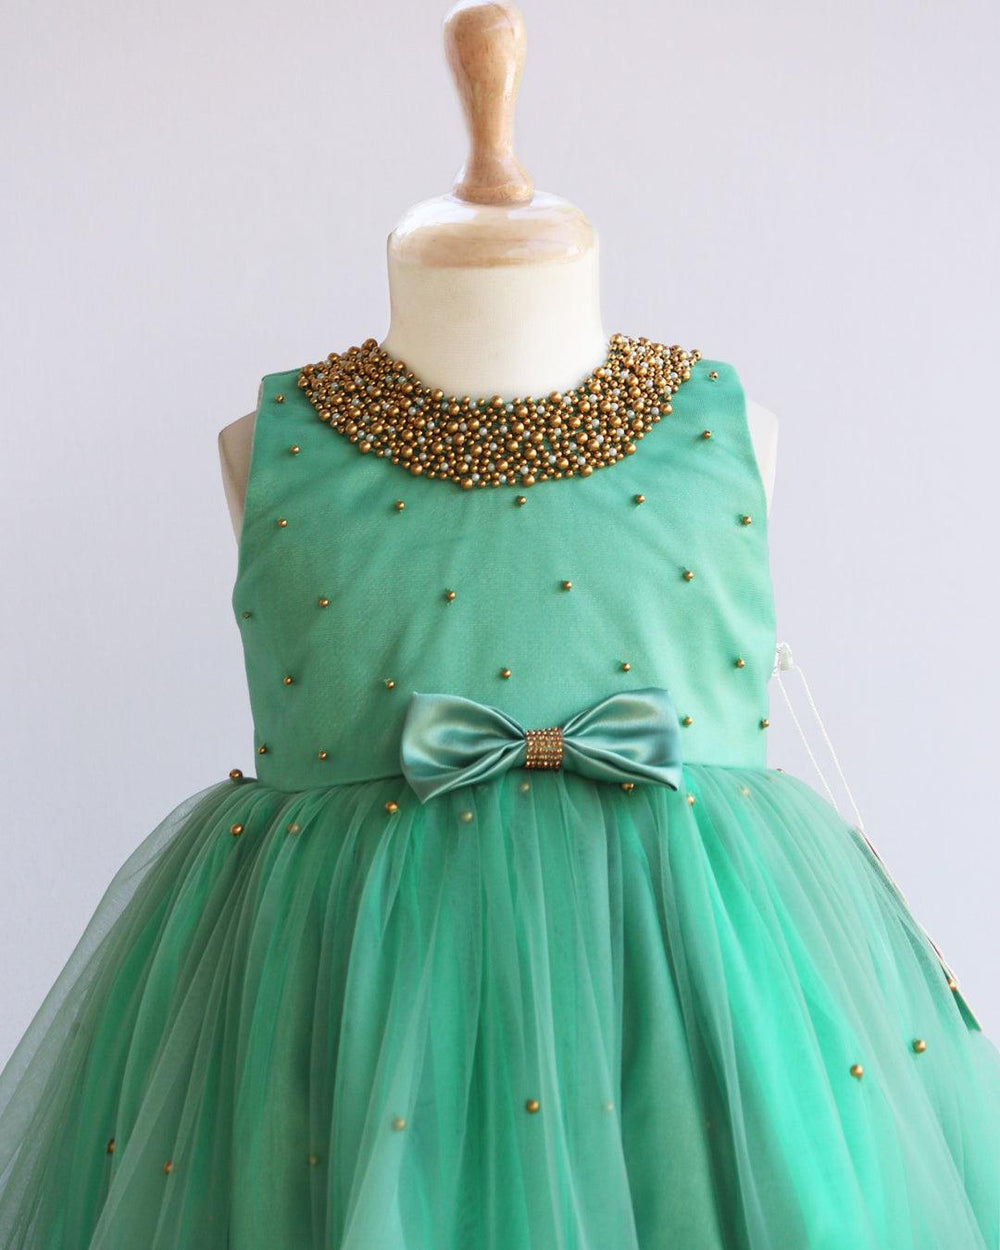 Pastel Green Beads Handwork Ruffles Frock
Material: Pastel Green Shade Frock mono net used on the frock. Yoke portion is designed with handwork pattern with neck fully designed with beads. Center portion is